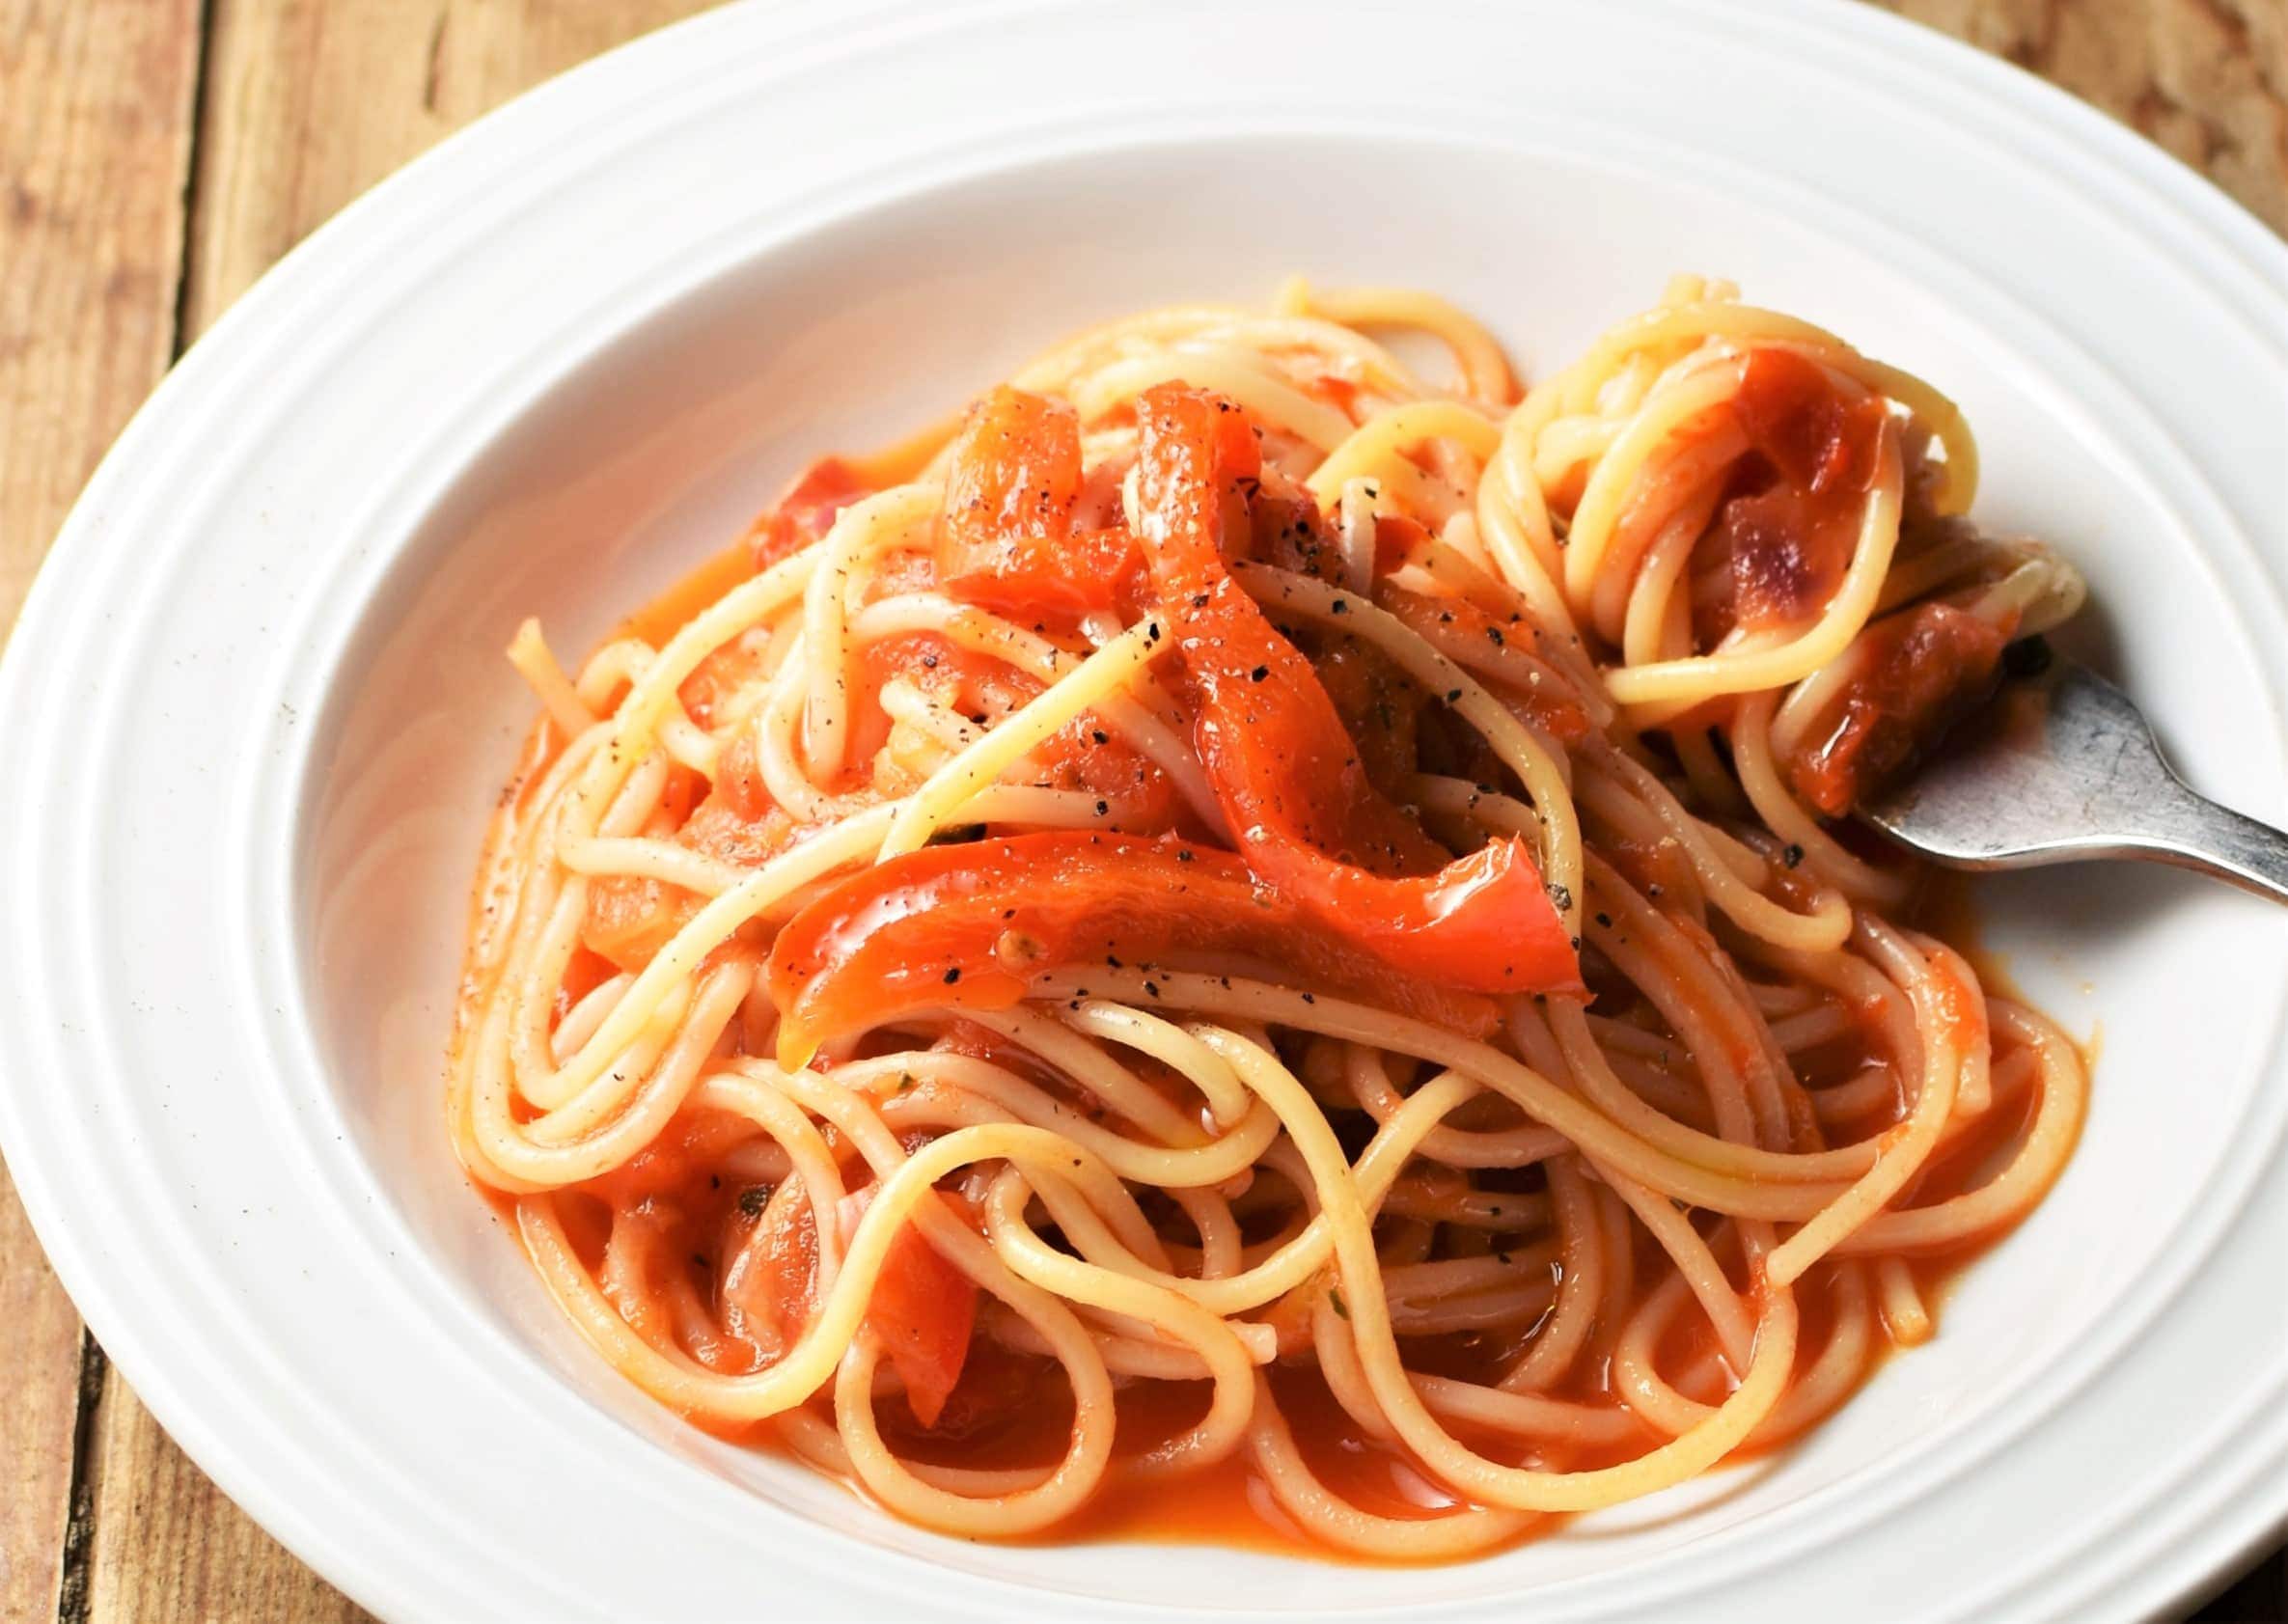 Side view of red pepper pasta with tomato sauce on white plate with fork.